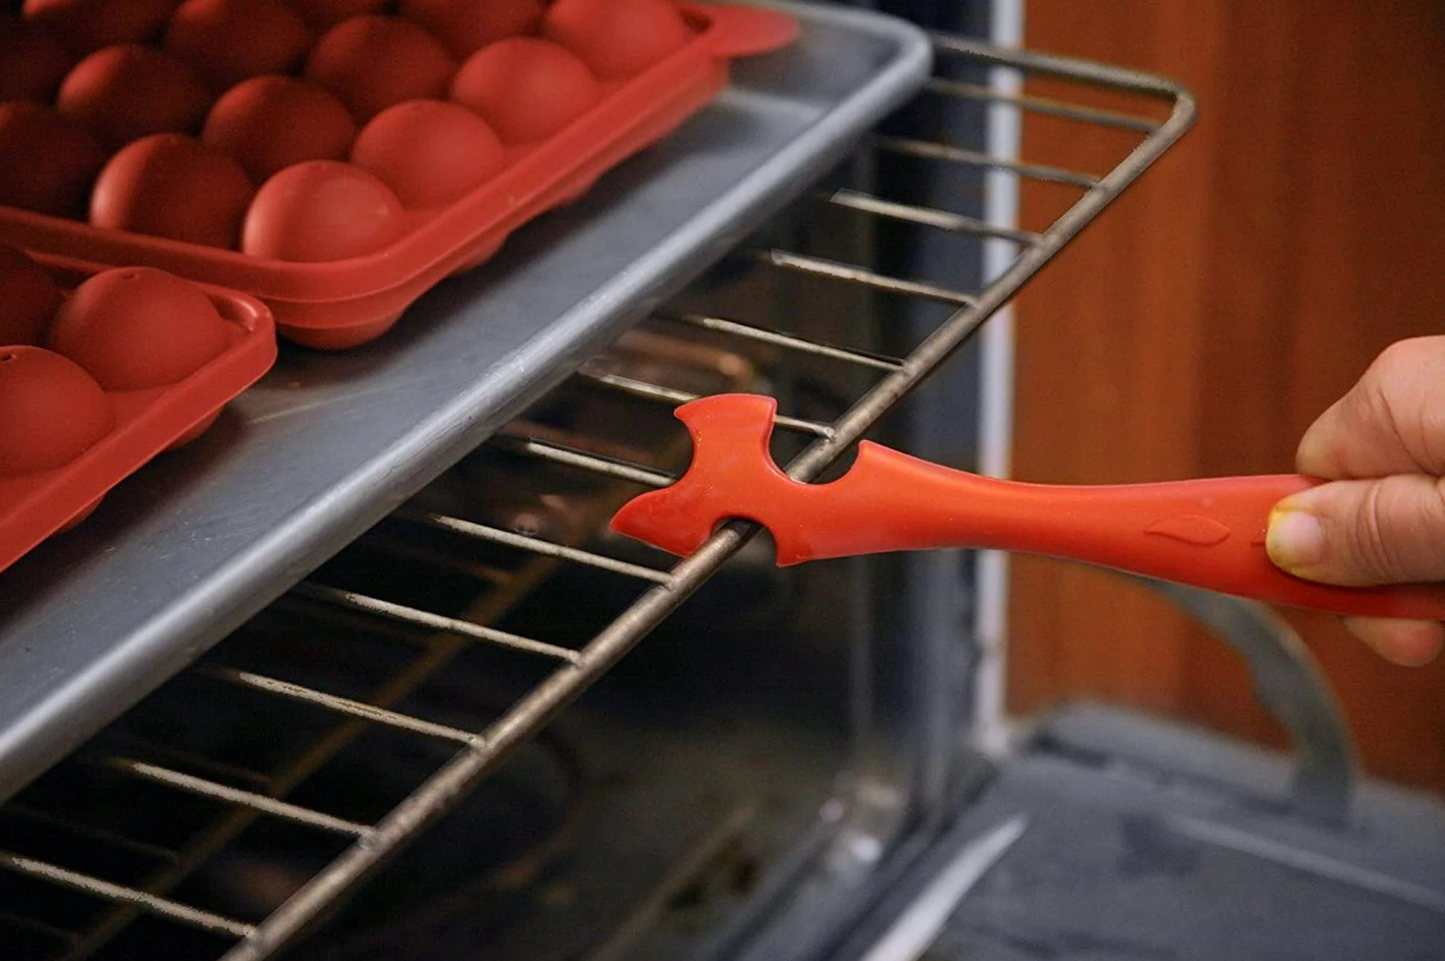 Norpro Silicone Oven Rack Push / Pull Tool